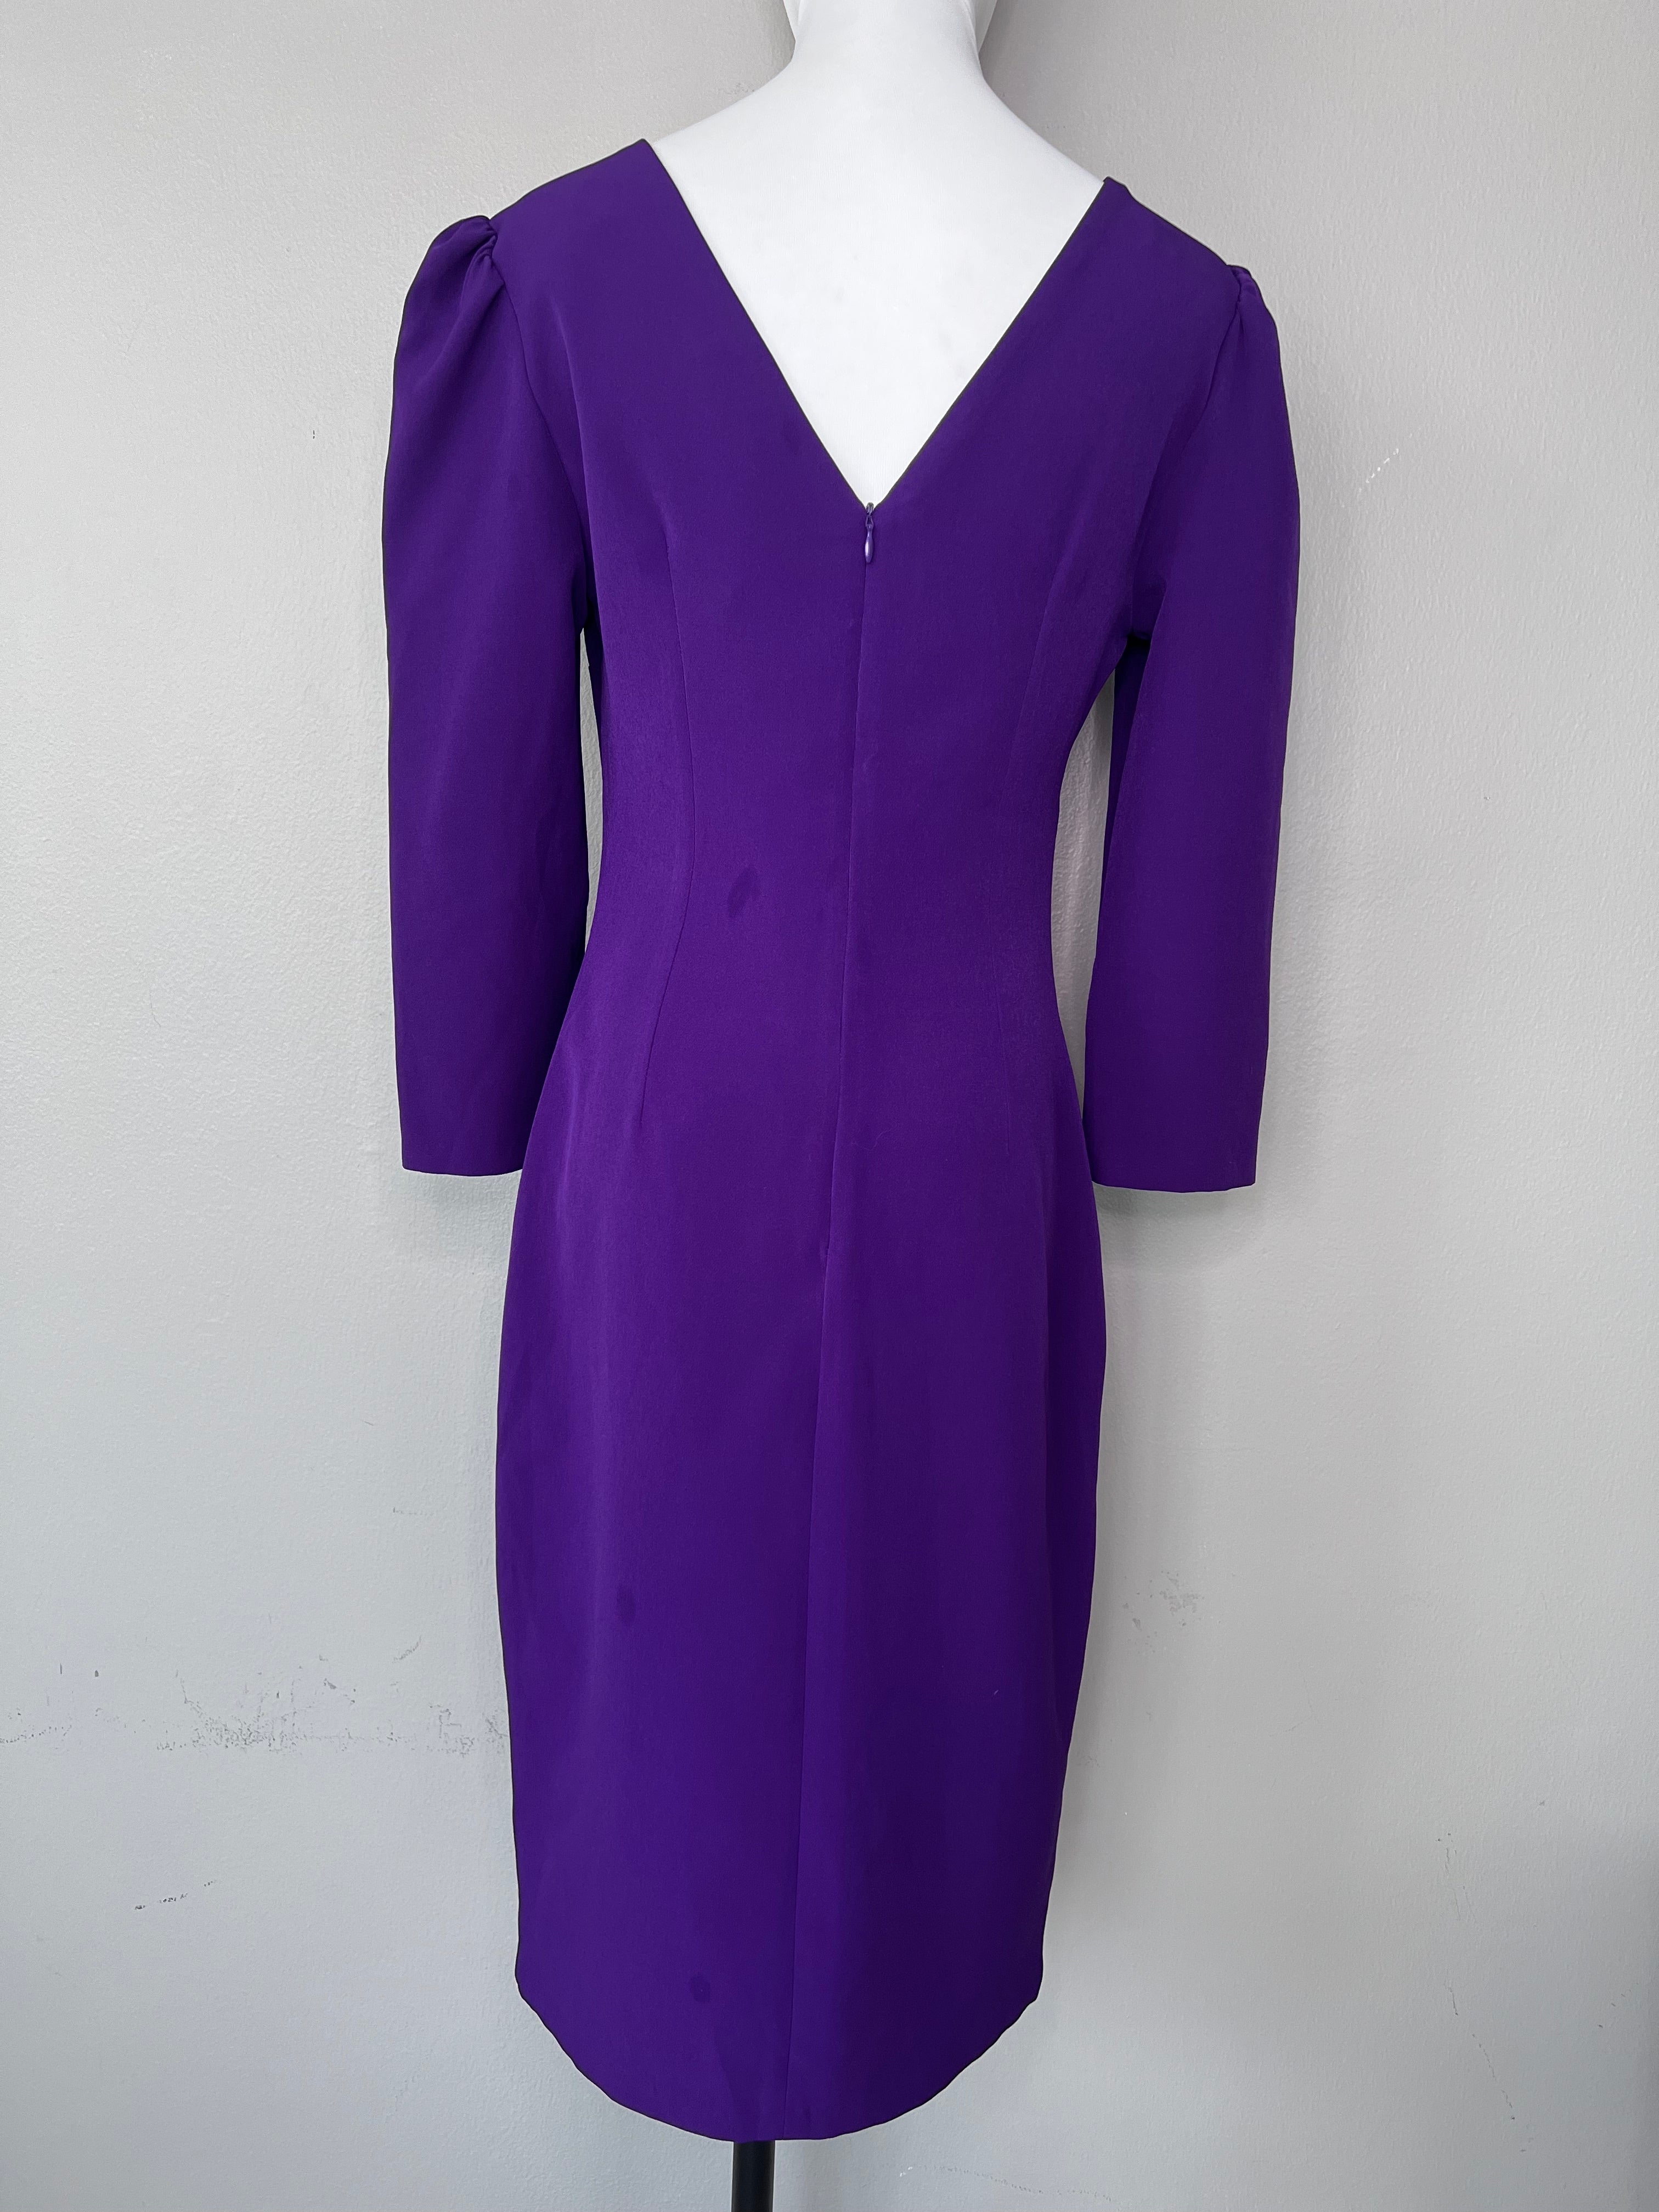 Brand new. Longsleeve purple dress with keyhole neckline and pinlike designs connecting the hole back together.- ALMAGORES